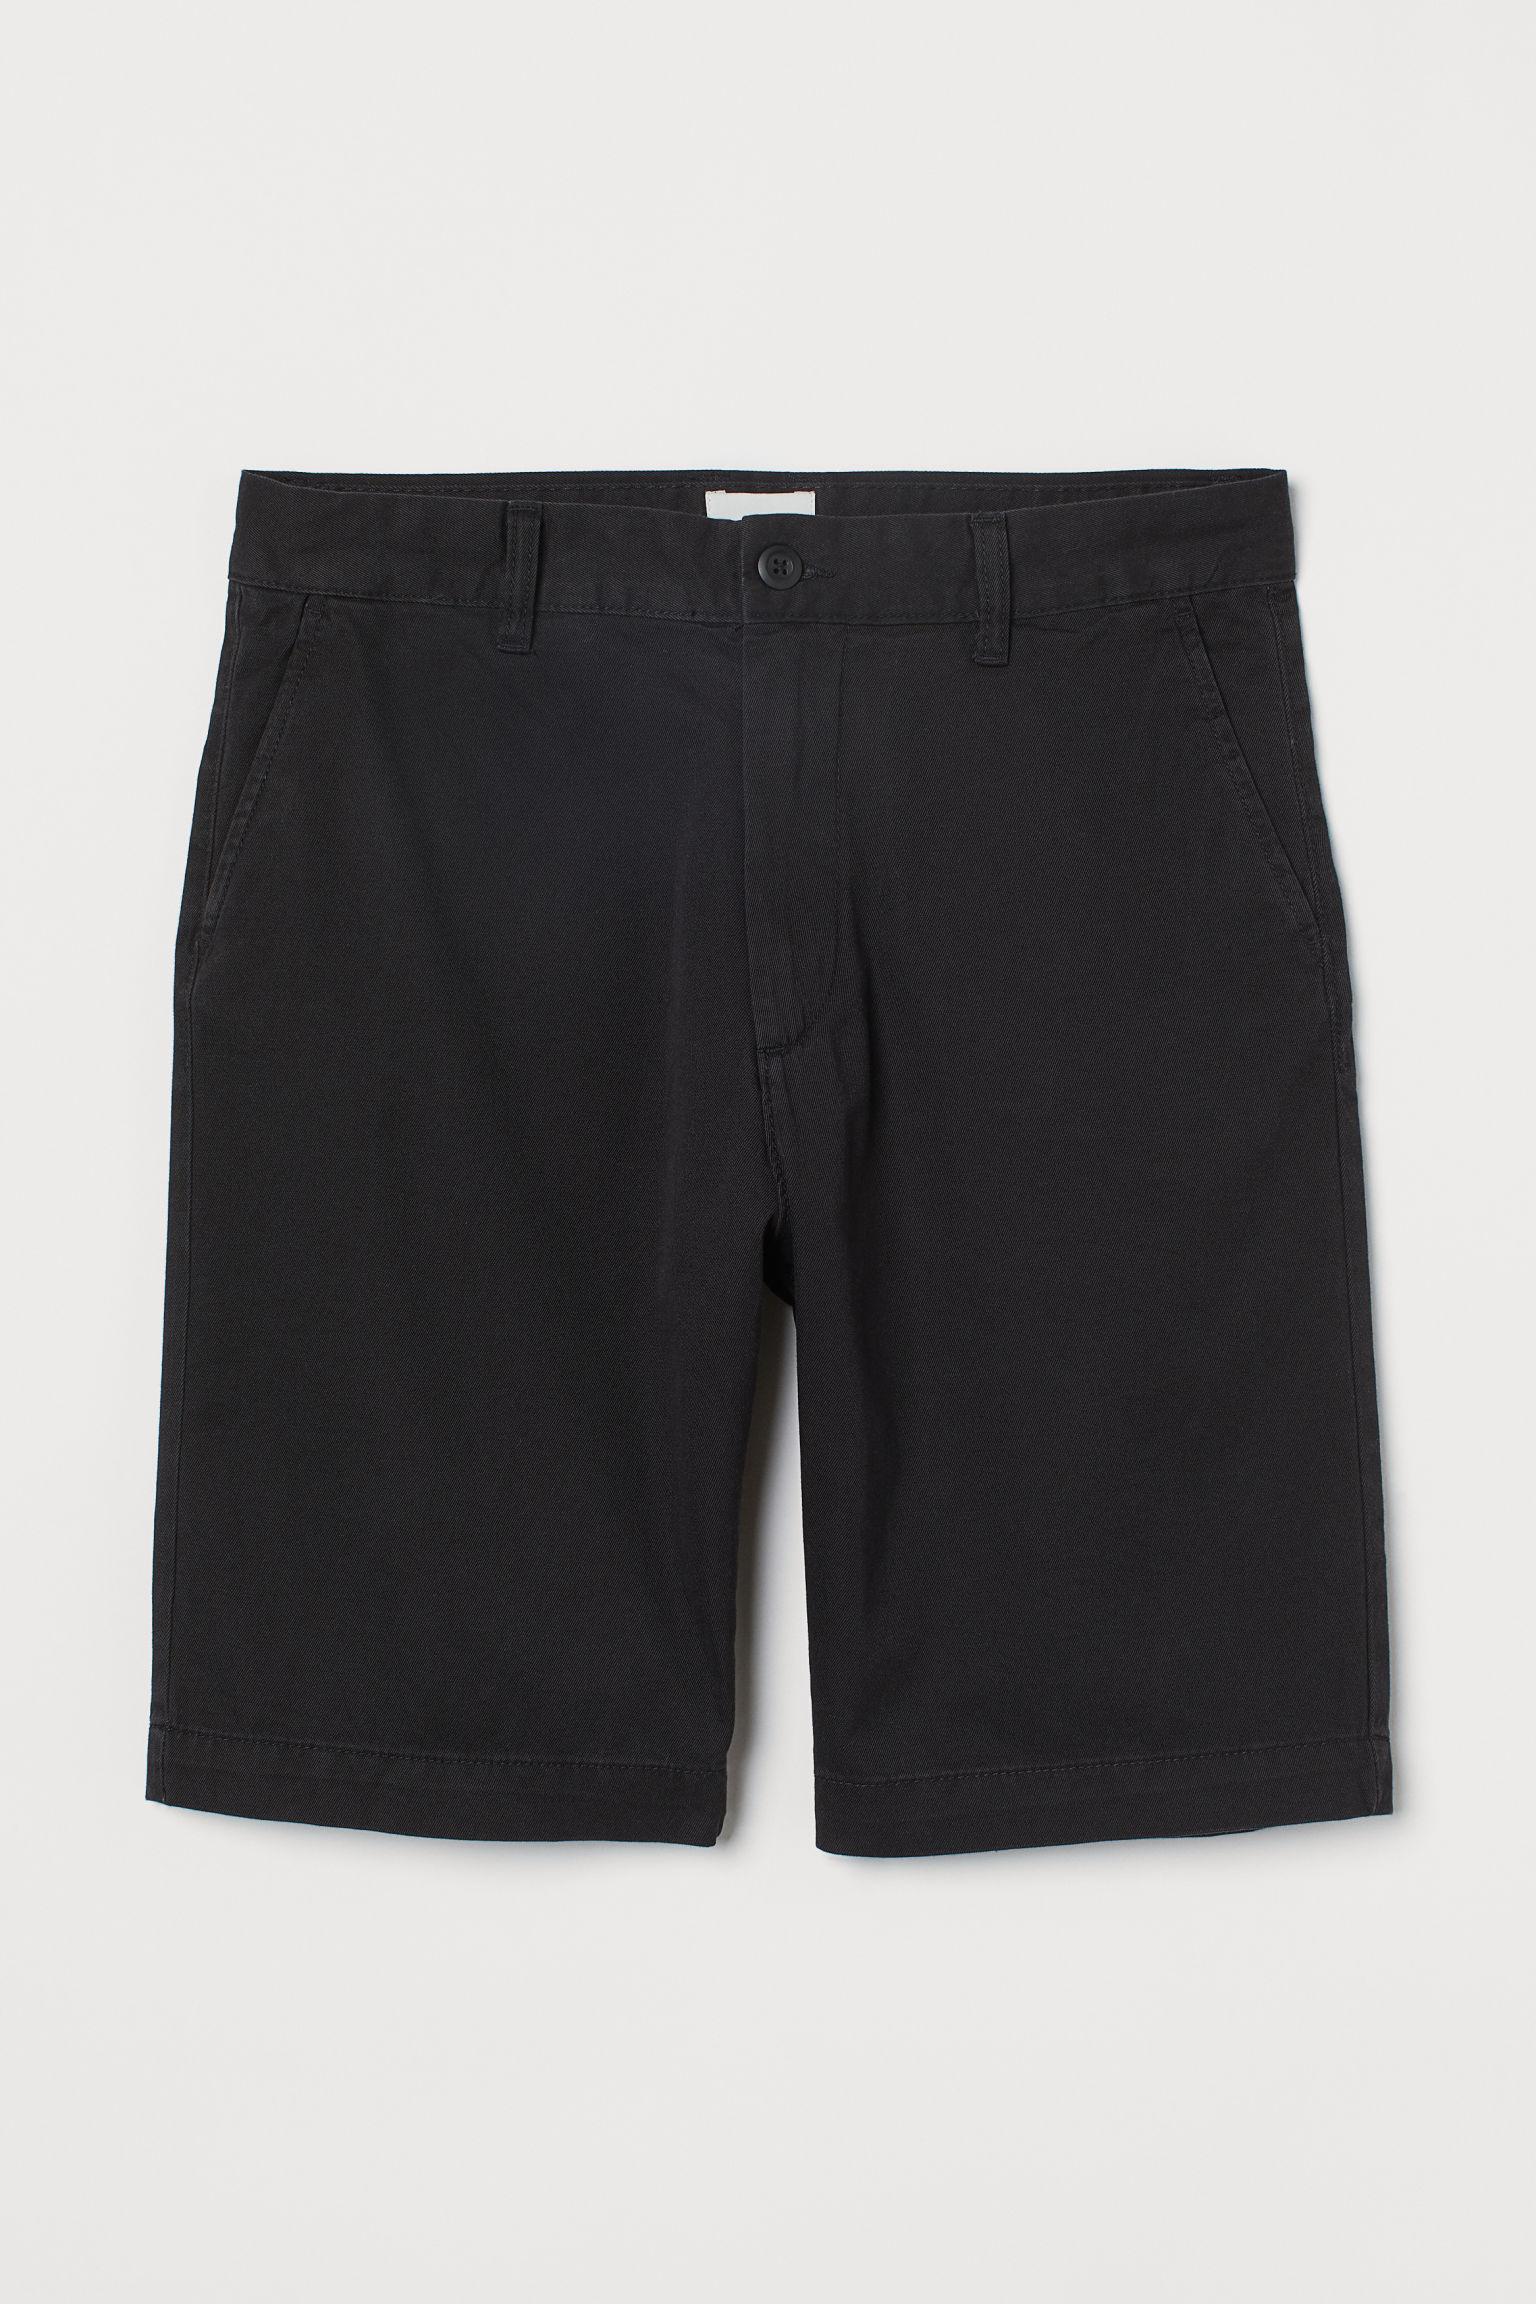 H&M Cotton Chino Shorts in Black for Men - Lyst